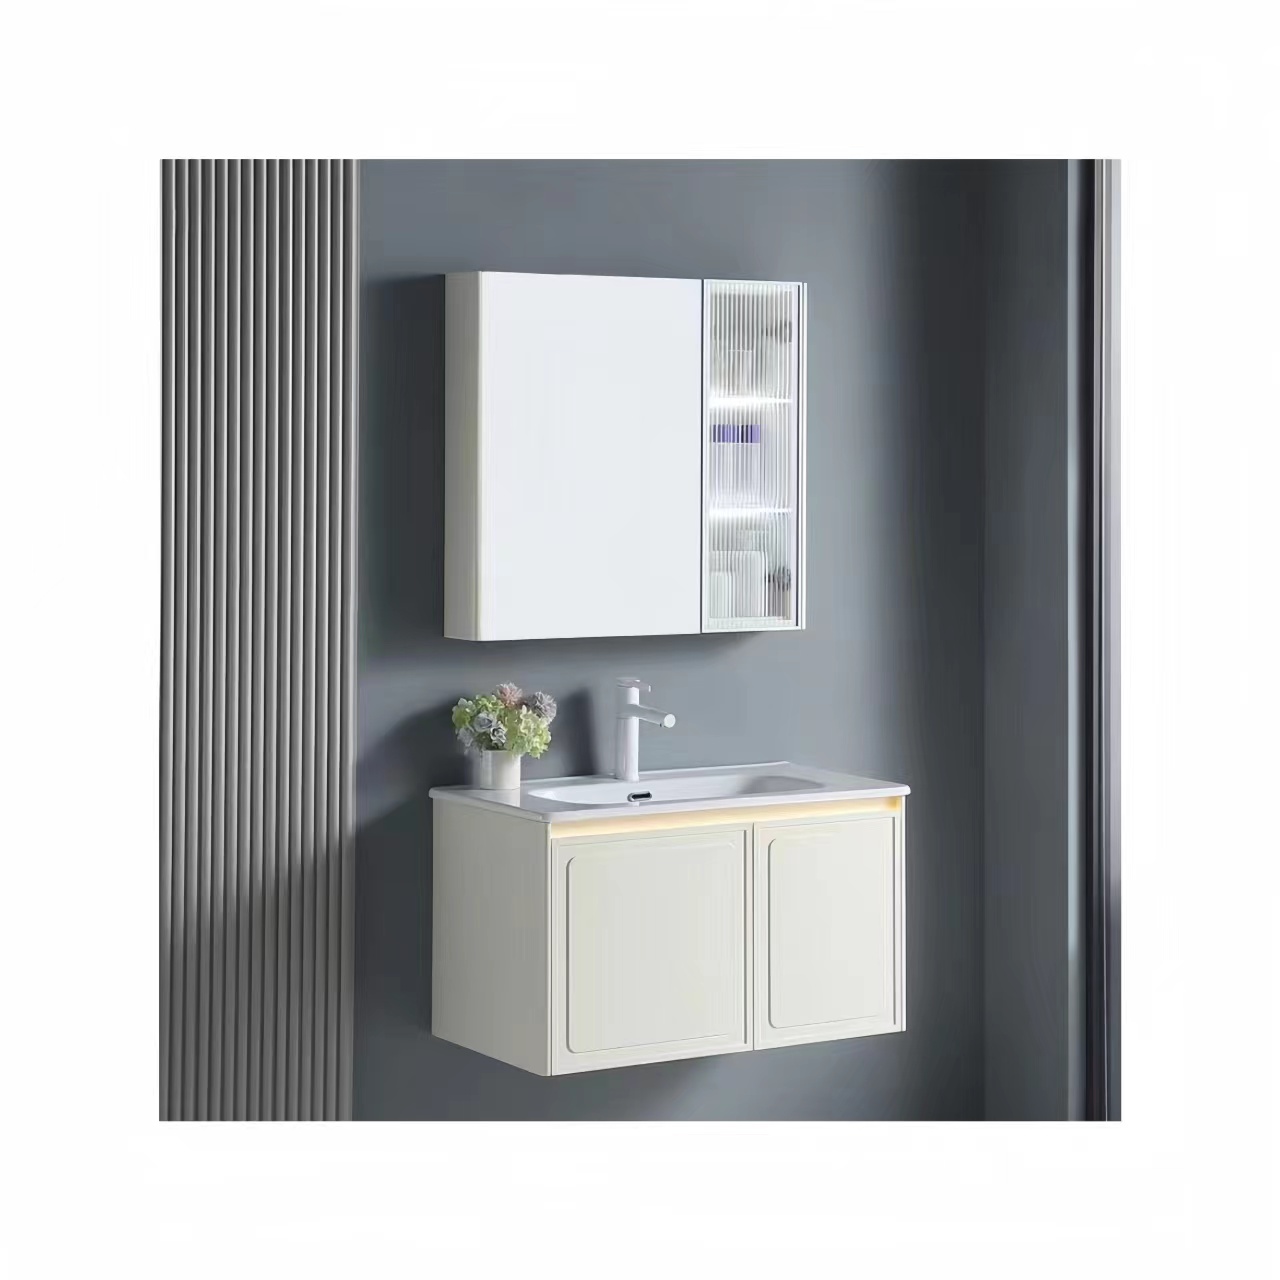 High quality modern style plywood bathroom vanity with mirror and basin